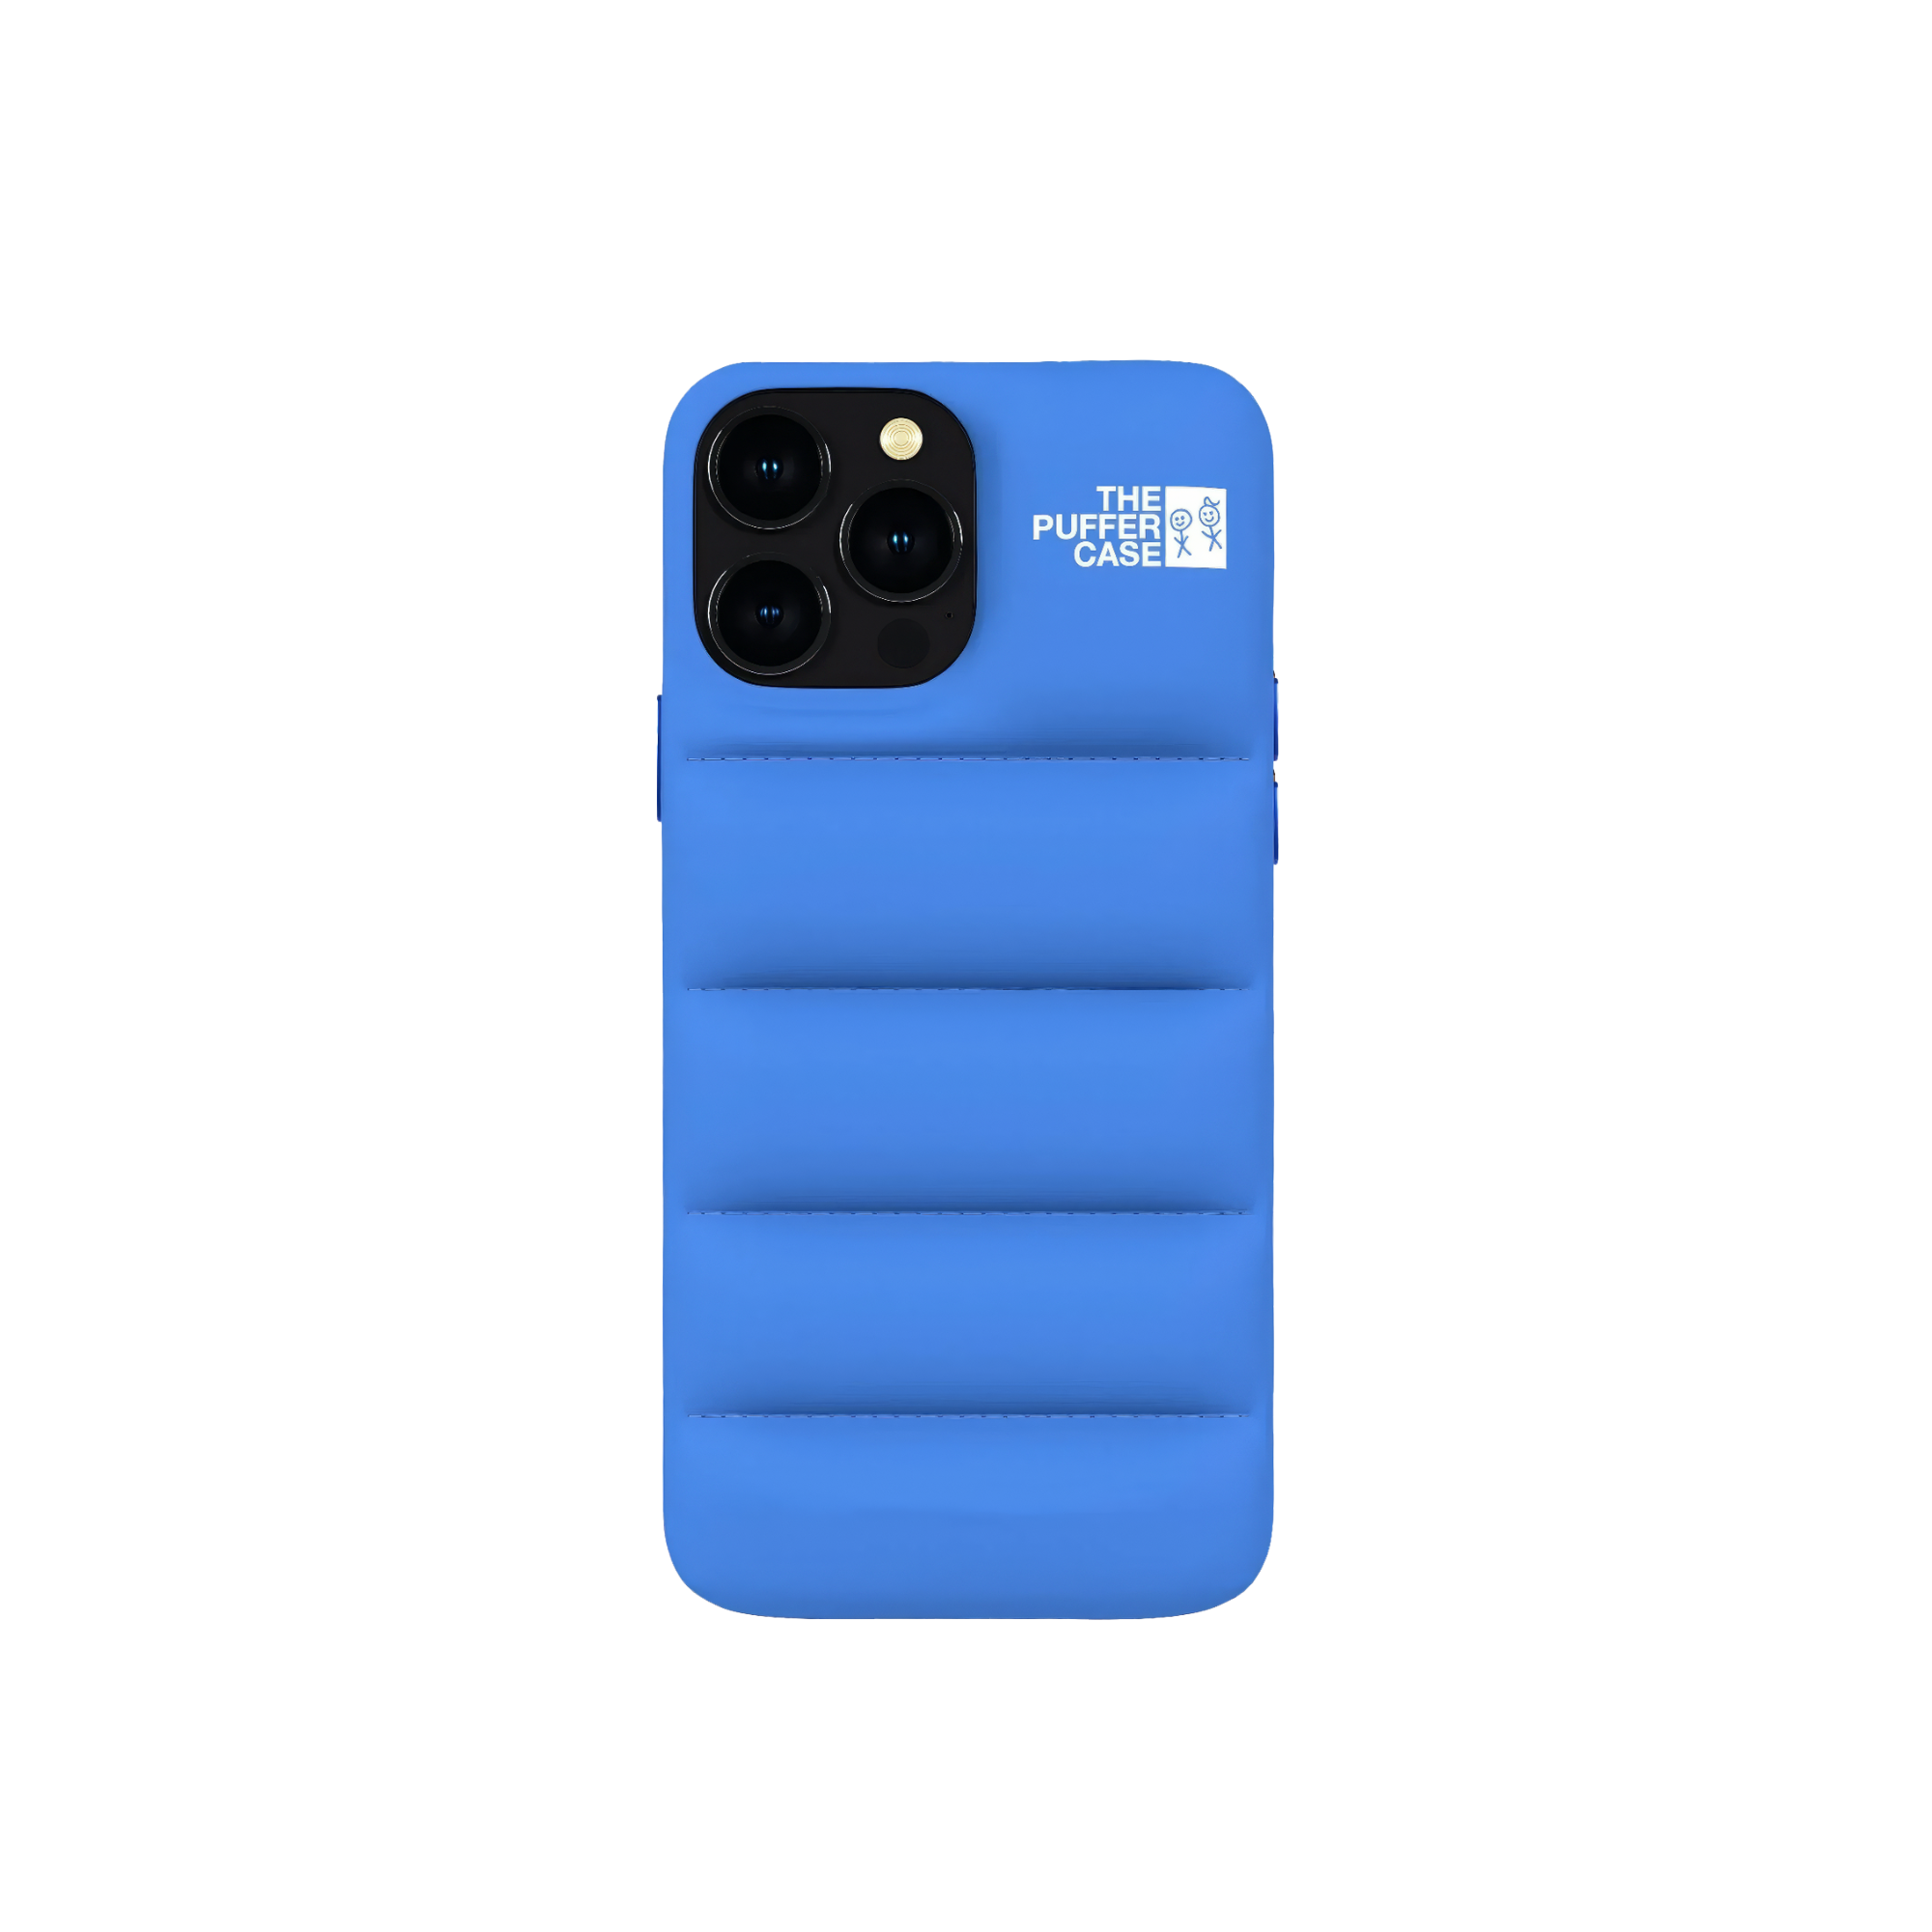 Soothing blue Puffer Case for iPhone, combining tranquility with quilted durability.